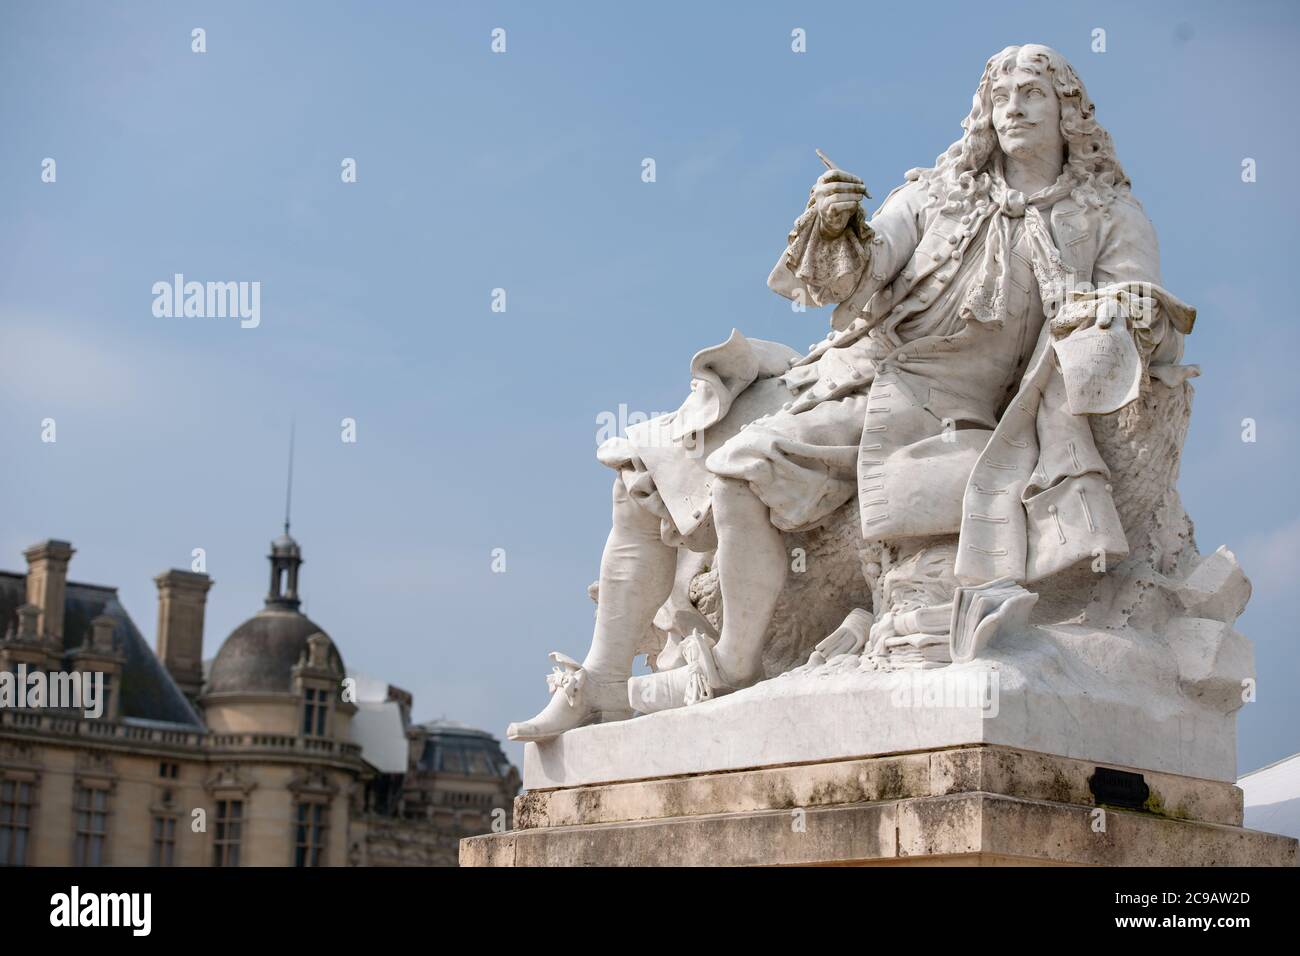 Statue of the playwright Molière by the sculptor Tony Noël at Château de Chantilly with the chateau in the background Stock Photo